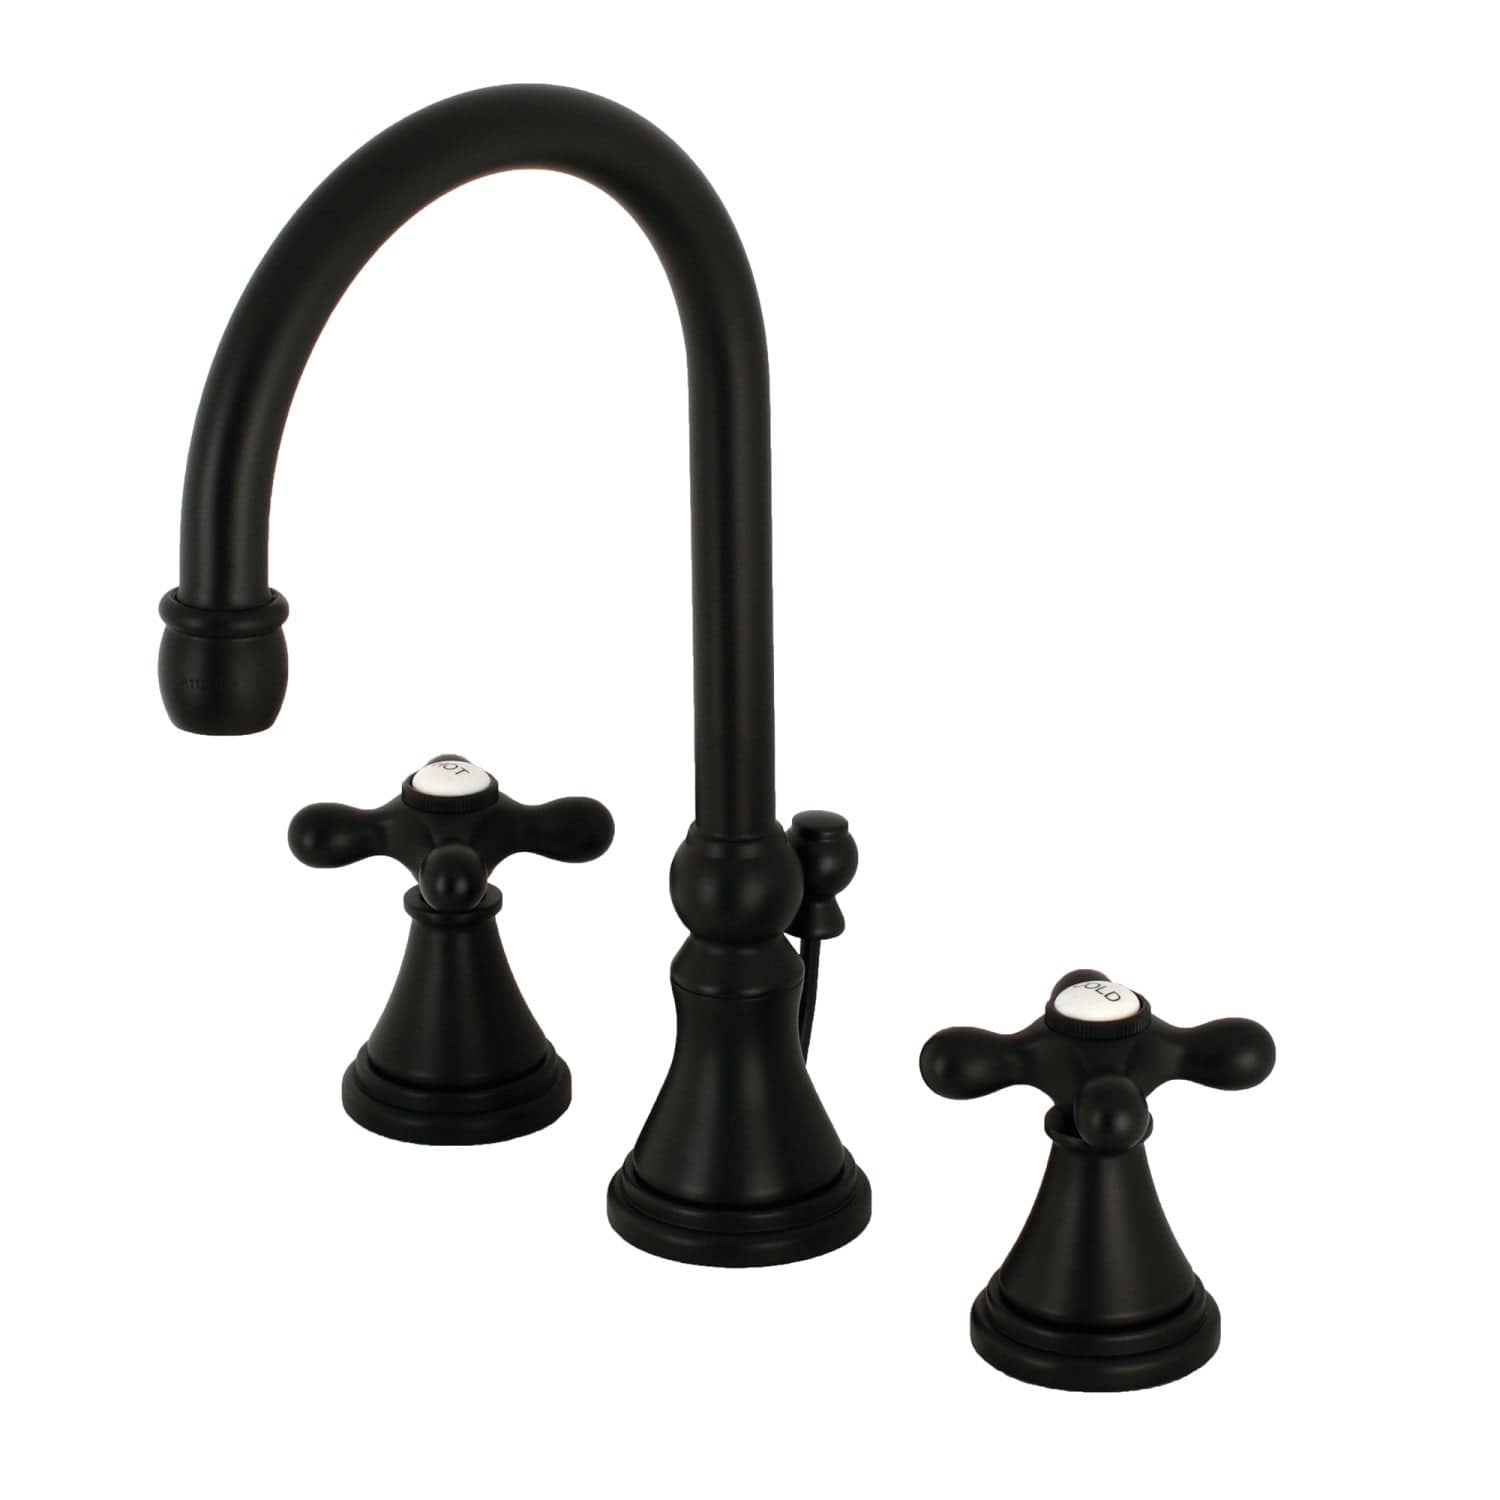 KINGSTON Brass Governor Widespread Bathroom Faucet with Brass Pop-Up - Matte Black